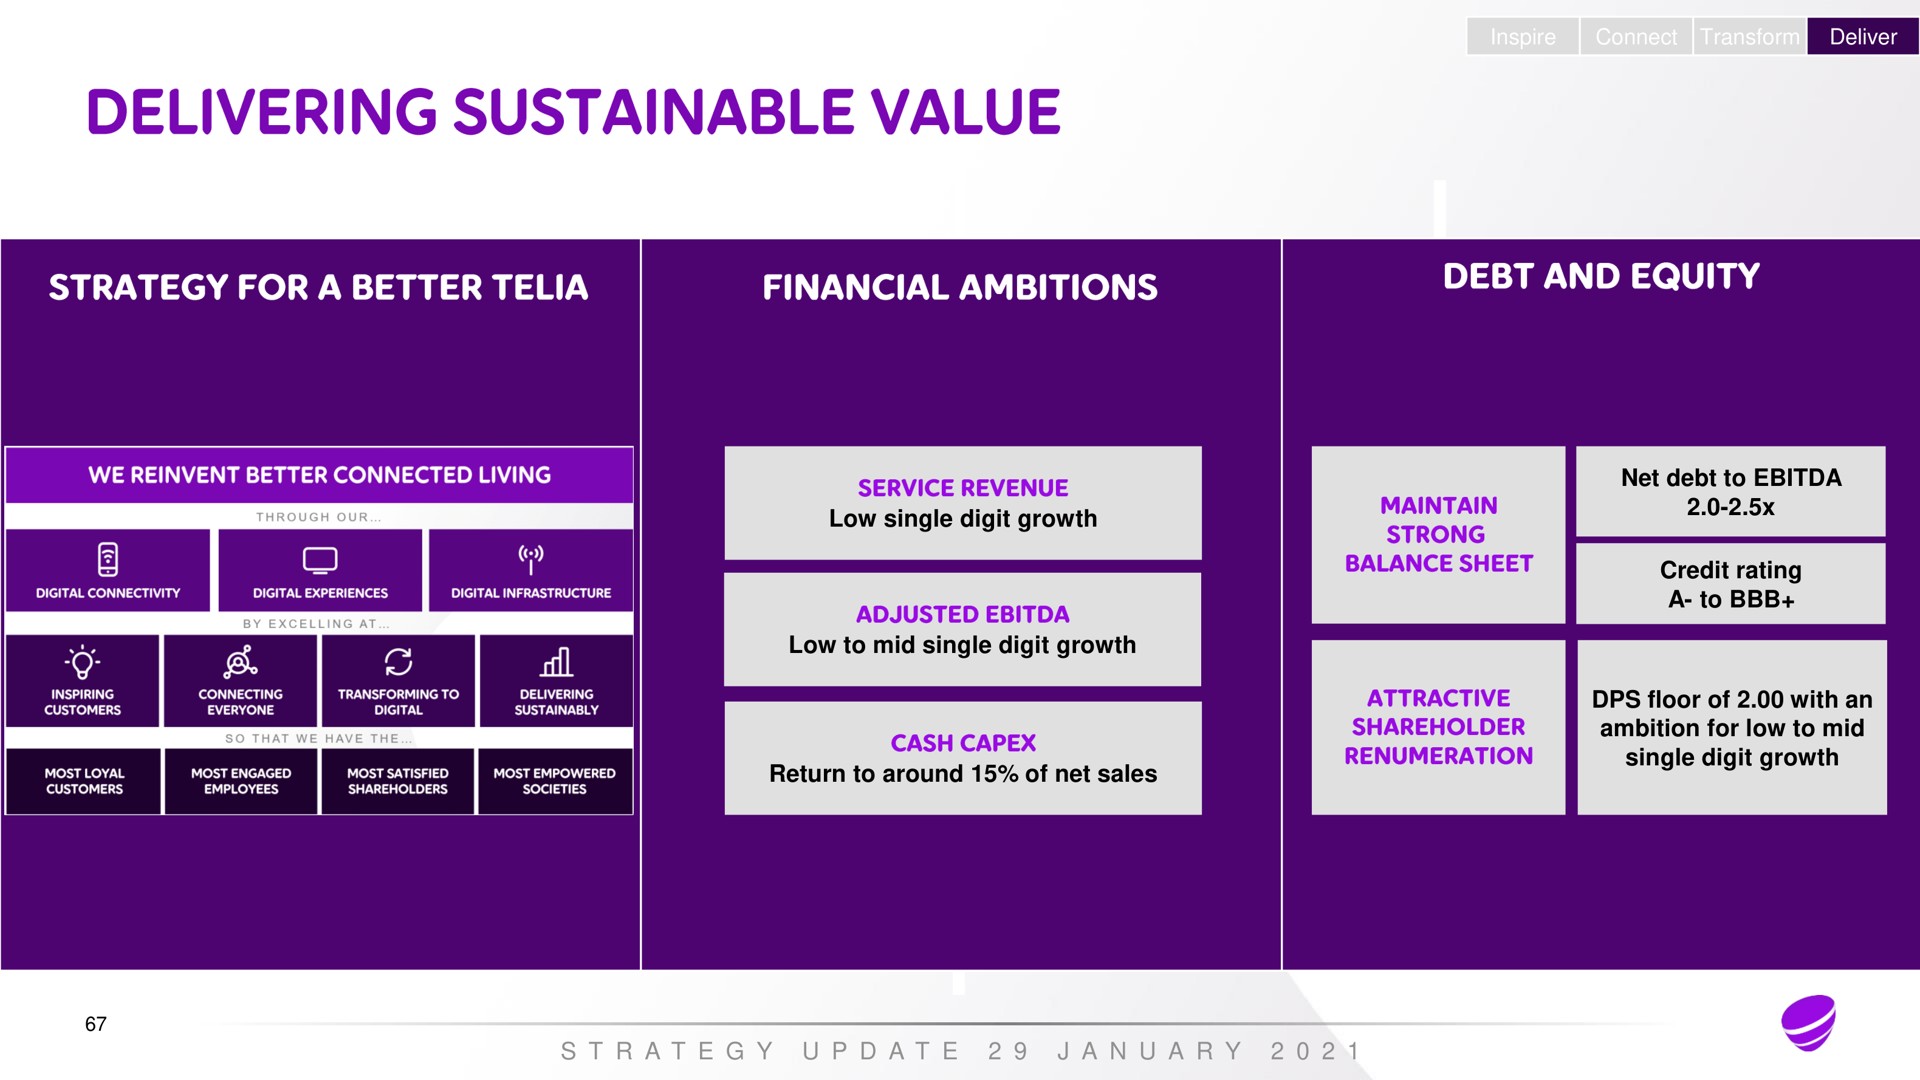 inspire connect transform deliver low single digit growth low to mid single digit growth return to around of net sales net debt to credit rating a to floor of with an ambition for low to mid single digit growth a a a a | Telia Company